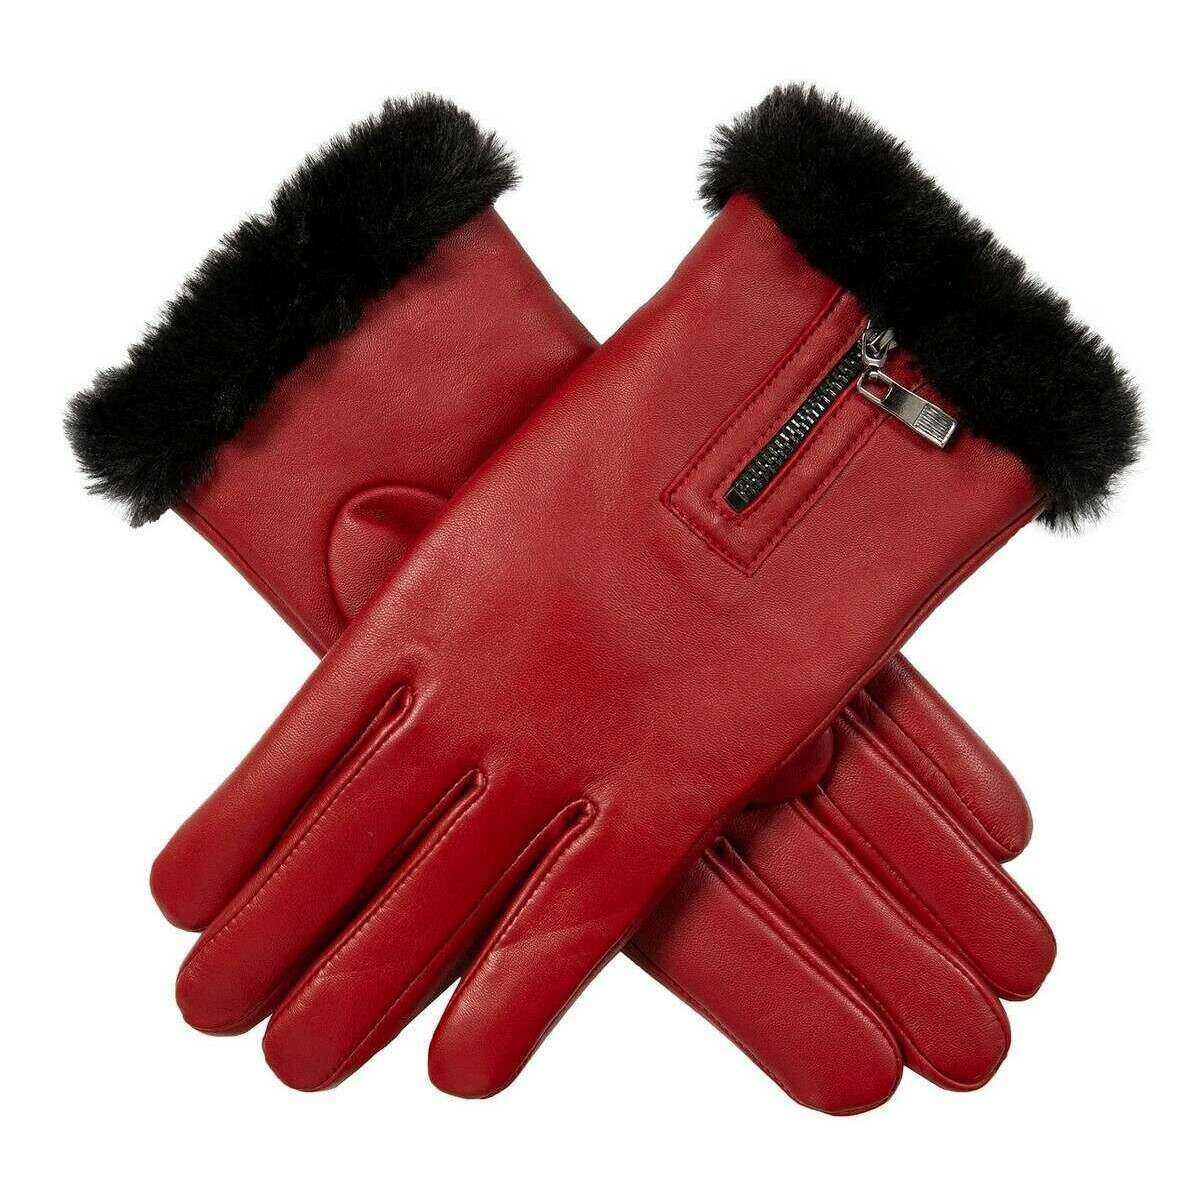 Dents Yasmin Touchscreen Leather Gloves - Berry Red/Black